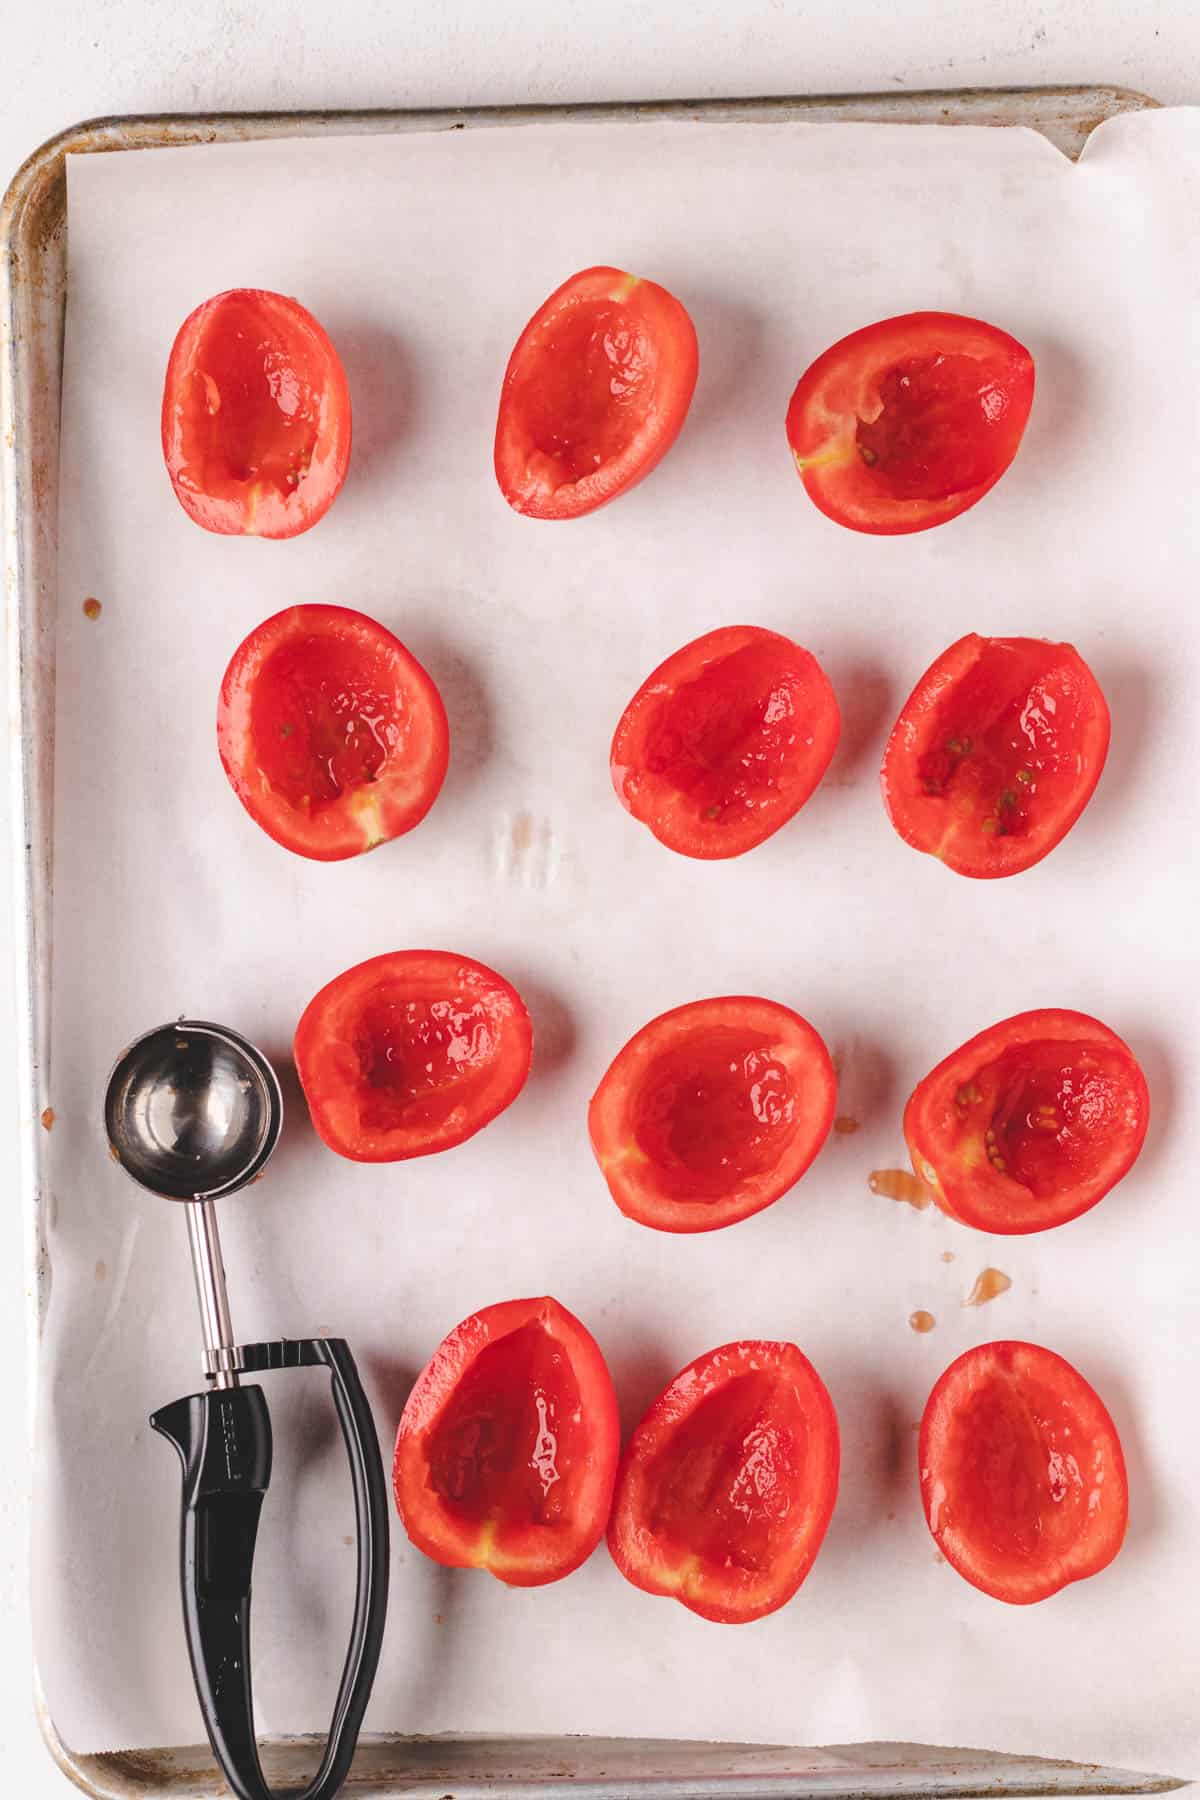 Roma tomato halves on a baking tray with tomato seeds removed.